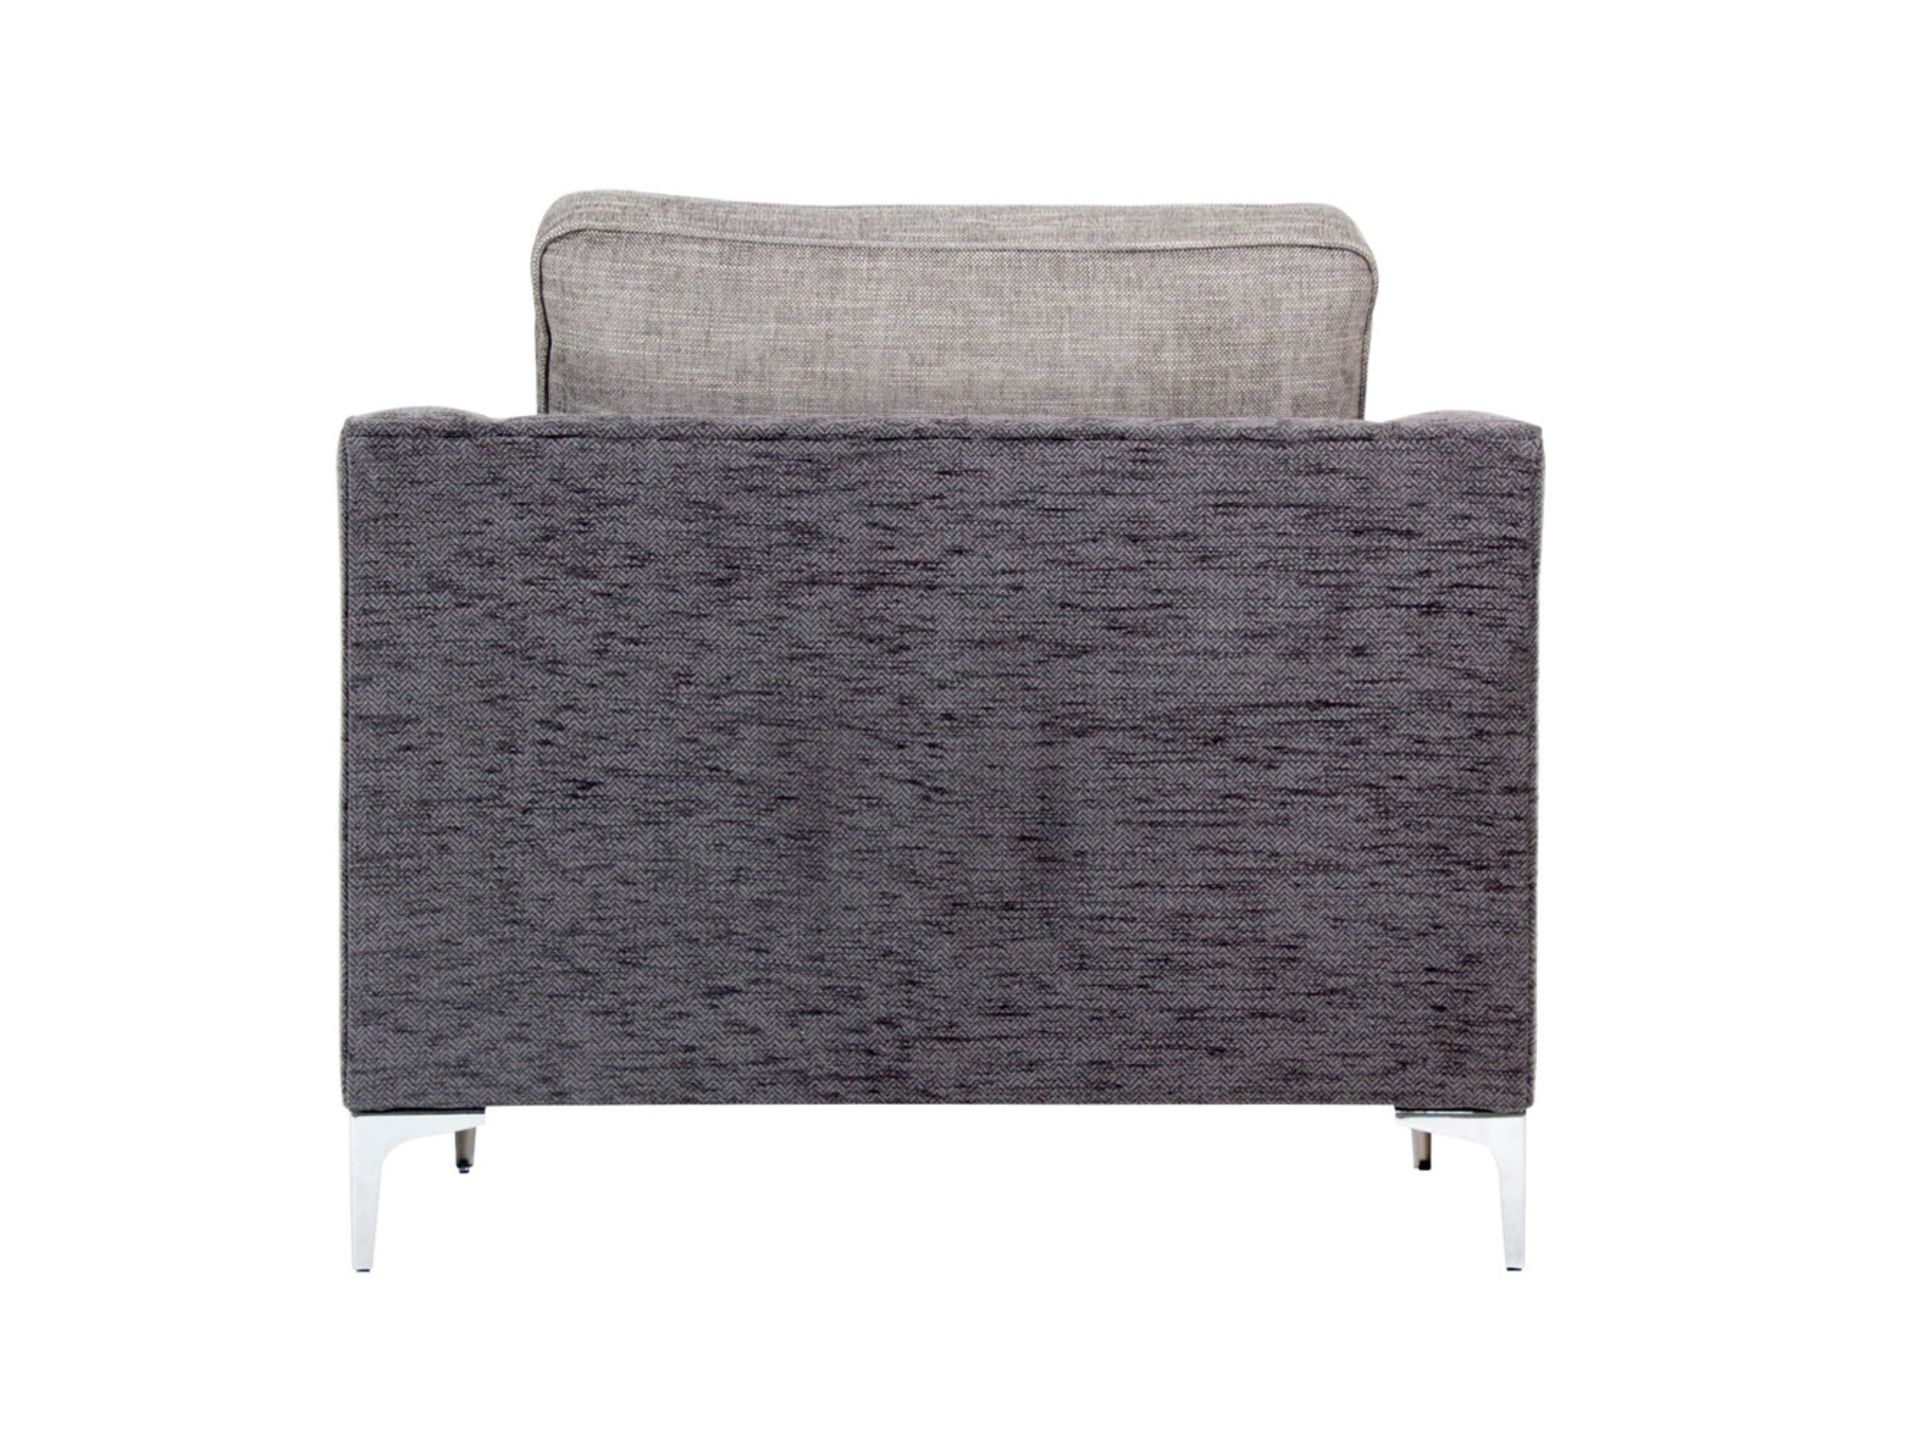 1 x Heyworth Snuggler Chair With Pewter & Cloud Fabric Upholstery - RRP £949! - Image 5 of 5